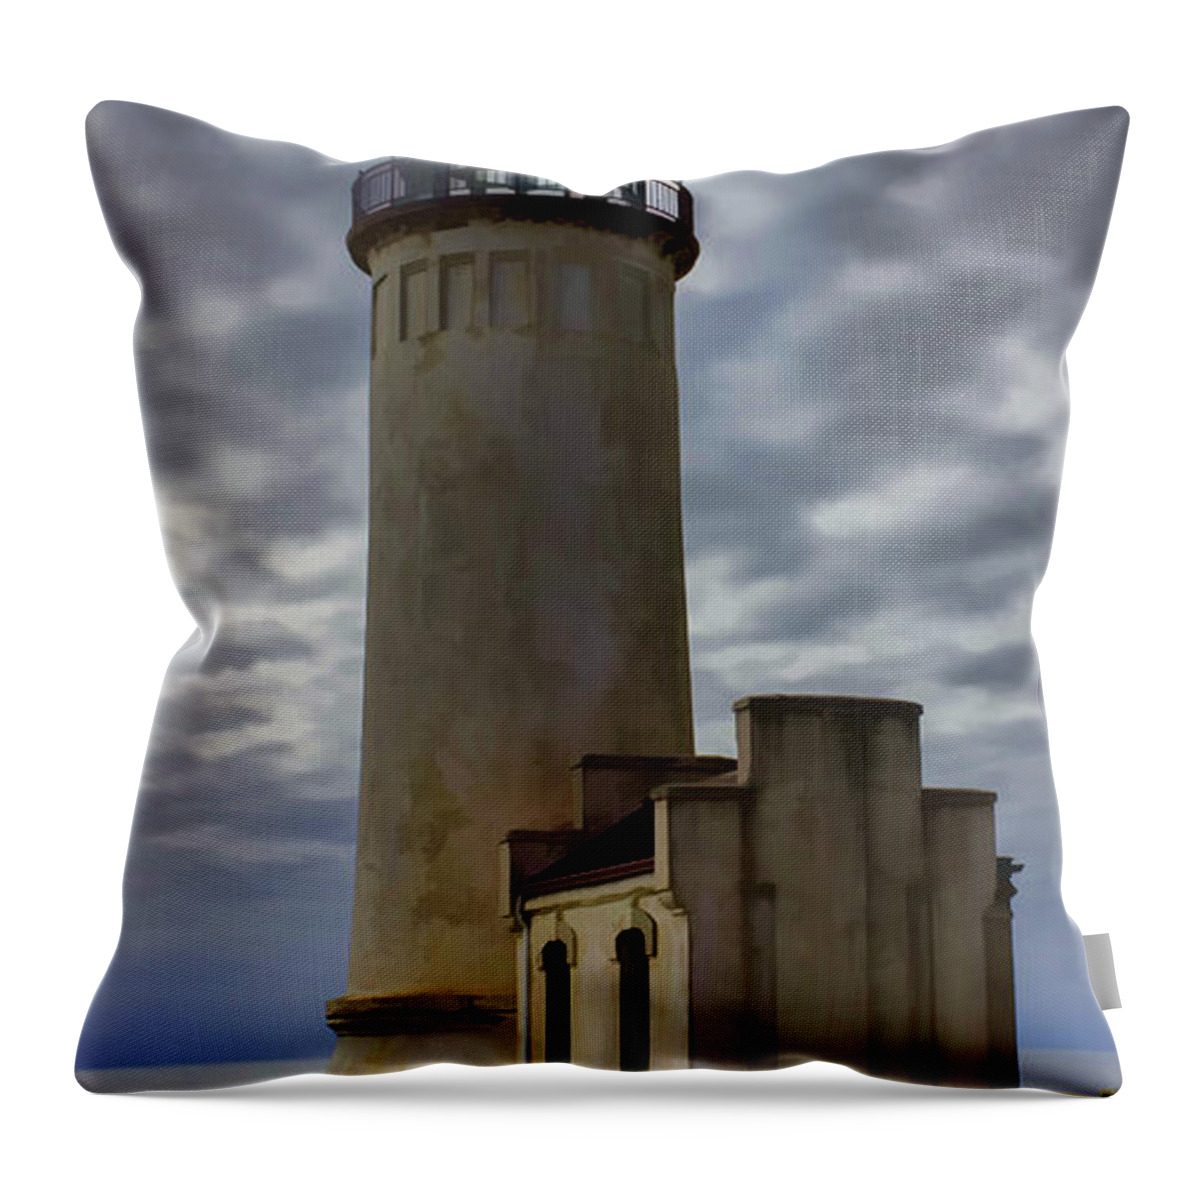 North Head Lighthouse Throw Pillow featuring the photograph North Head Lighthouse by Cathy Anderson